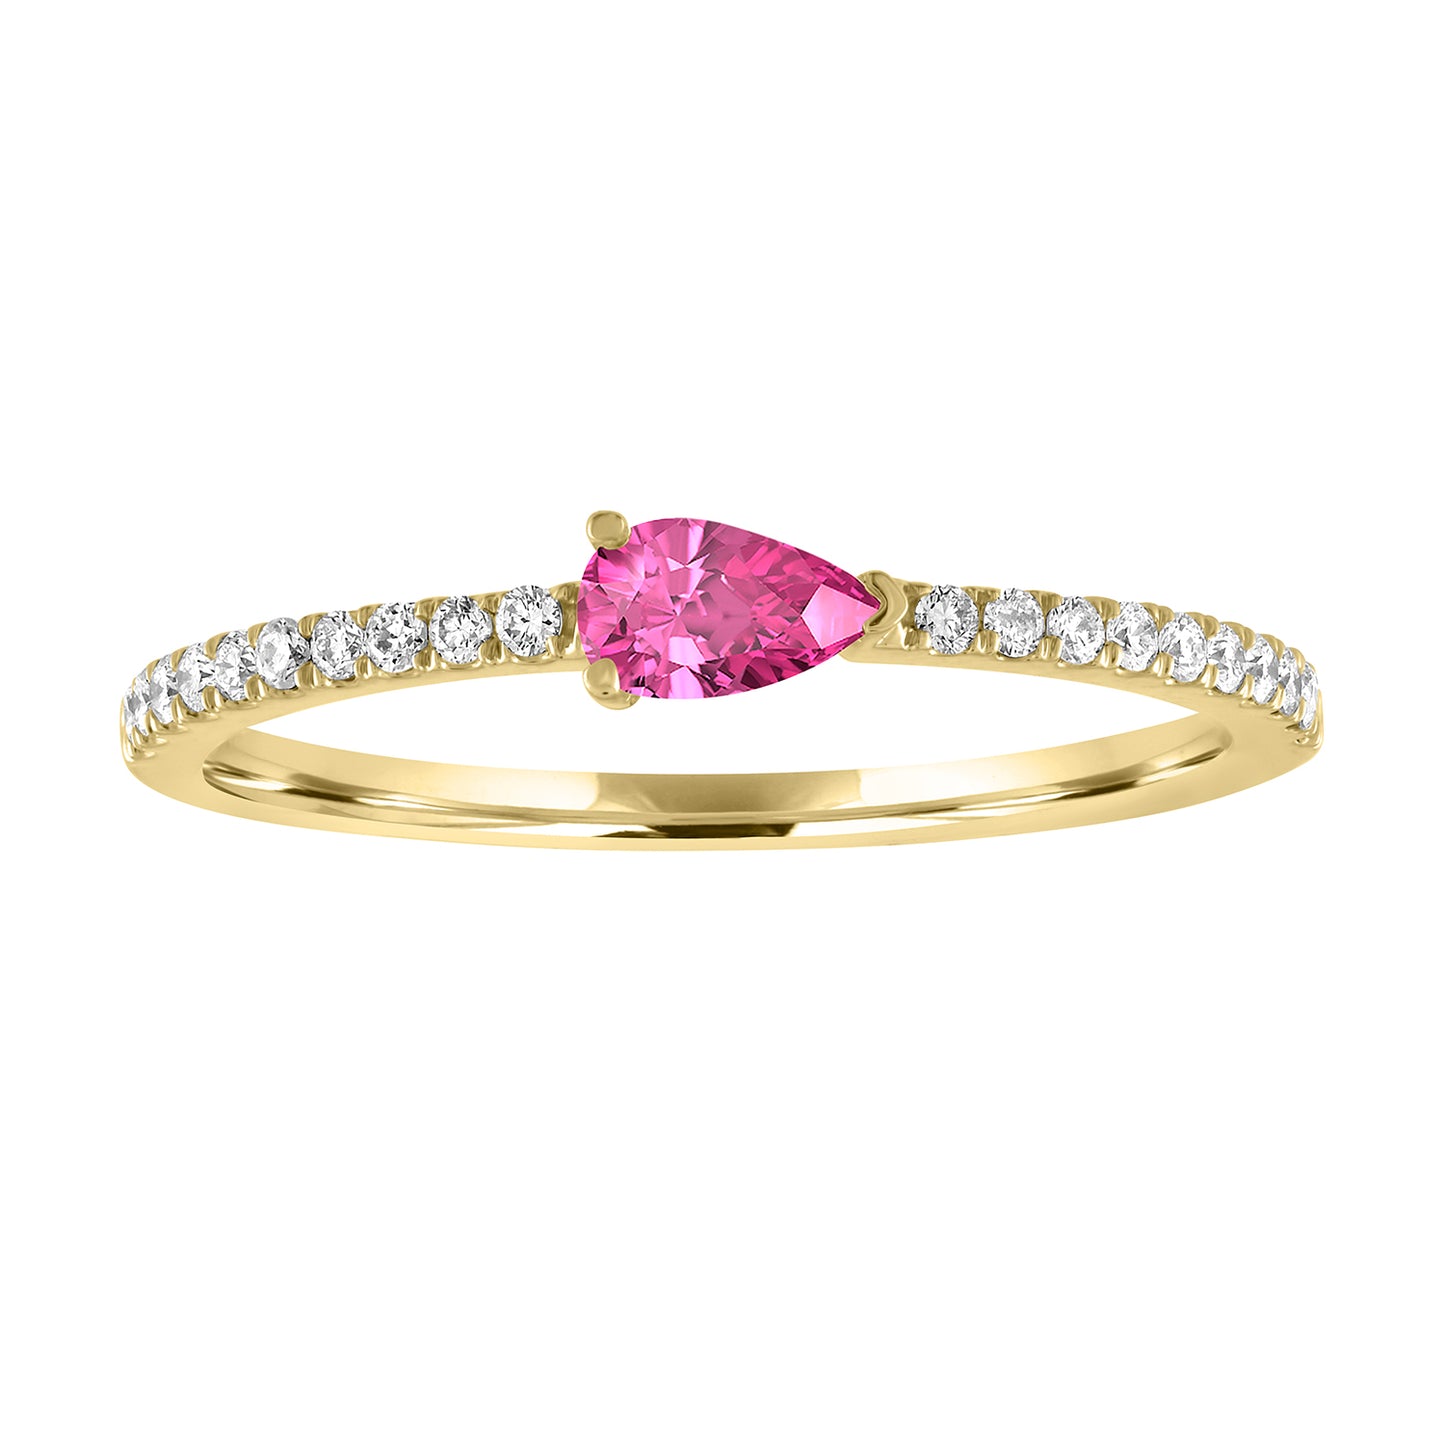 Yellow gold skinny band with a pear shaped pink tourmaline in the center and round diamonds on the shank. 